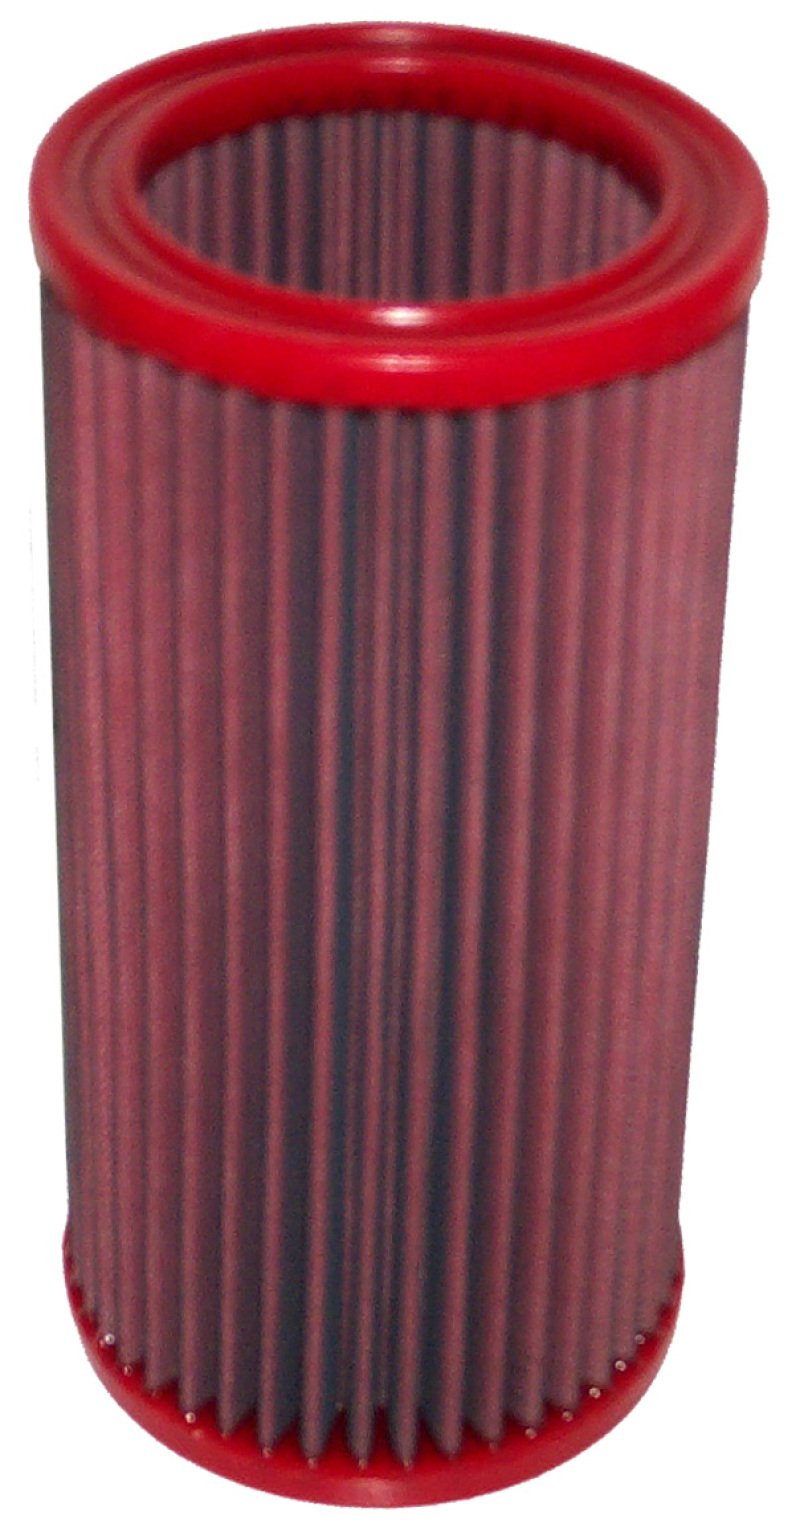 BMC 00-01 Renault Clio II Replacement Cylindrical Air Filter FB243/06 Main Image